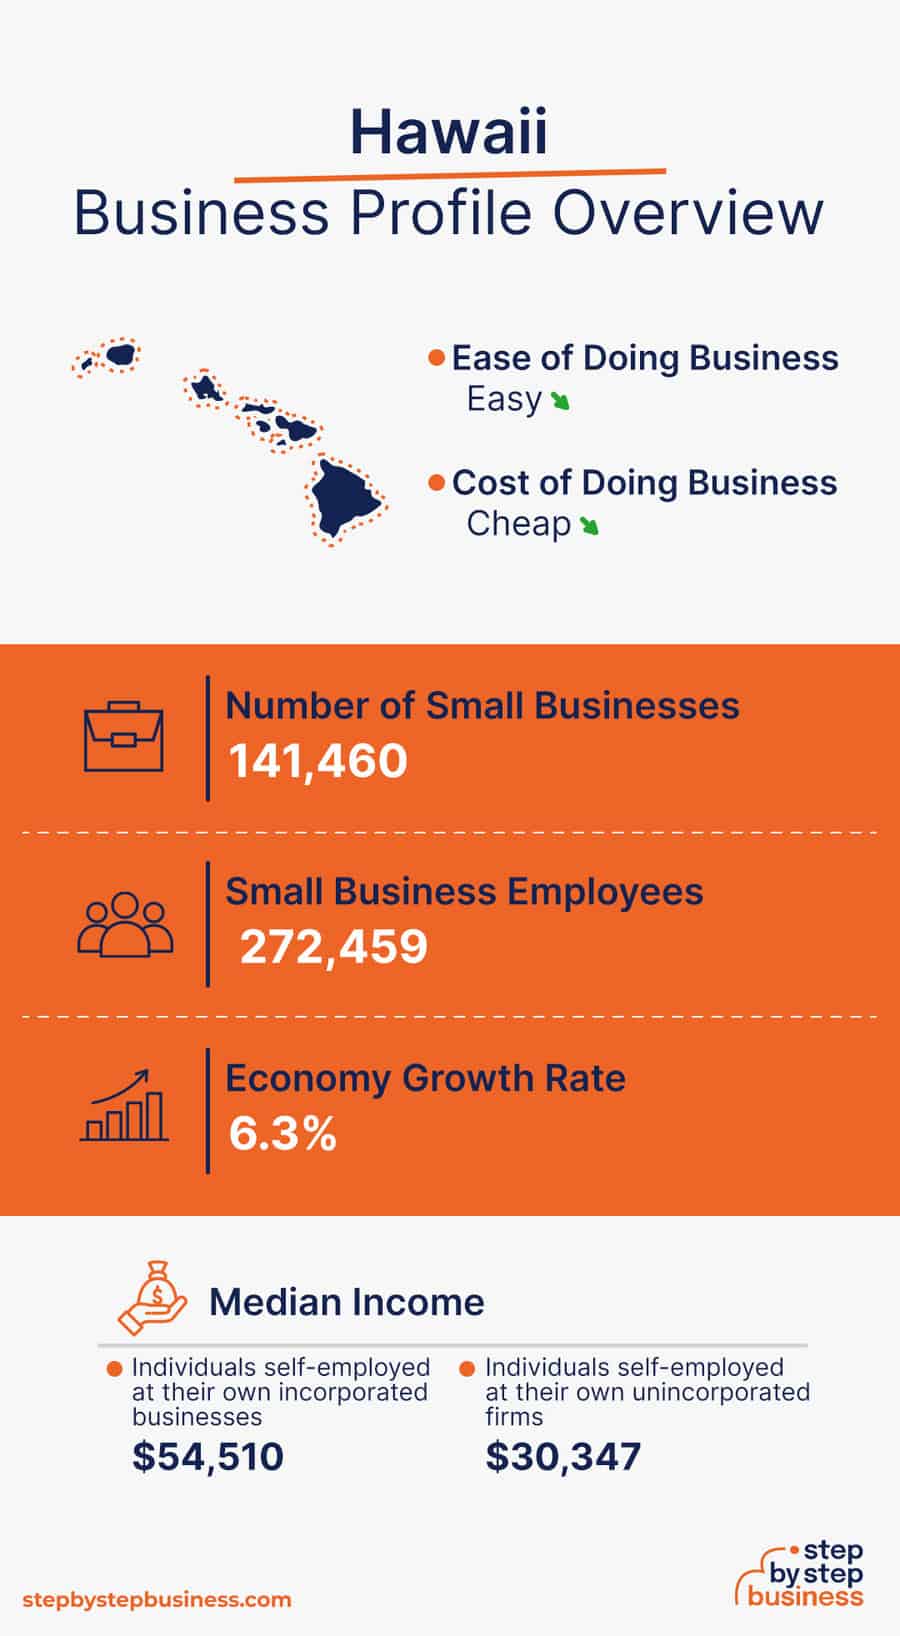 Hawaii Business Profile Overview